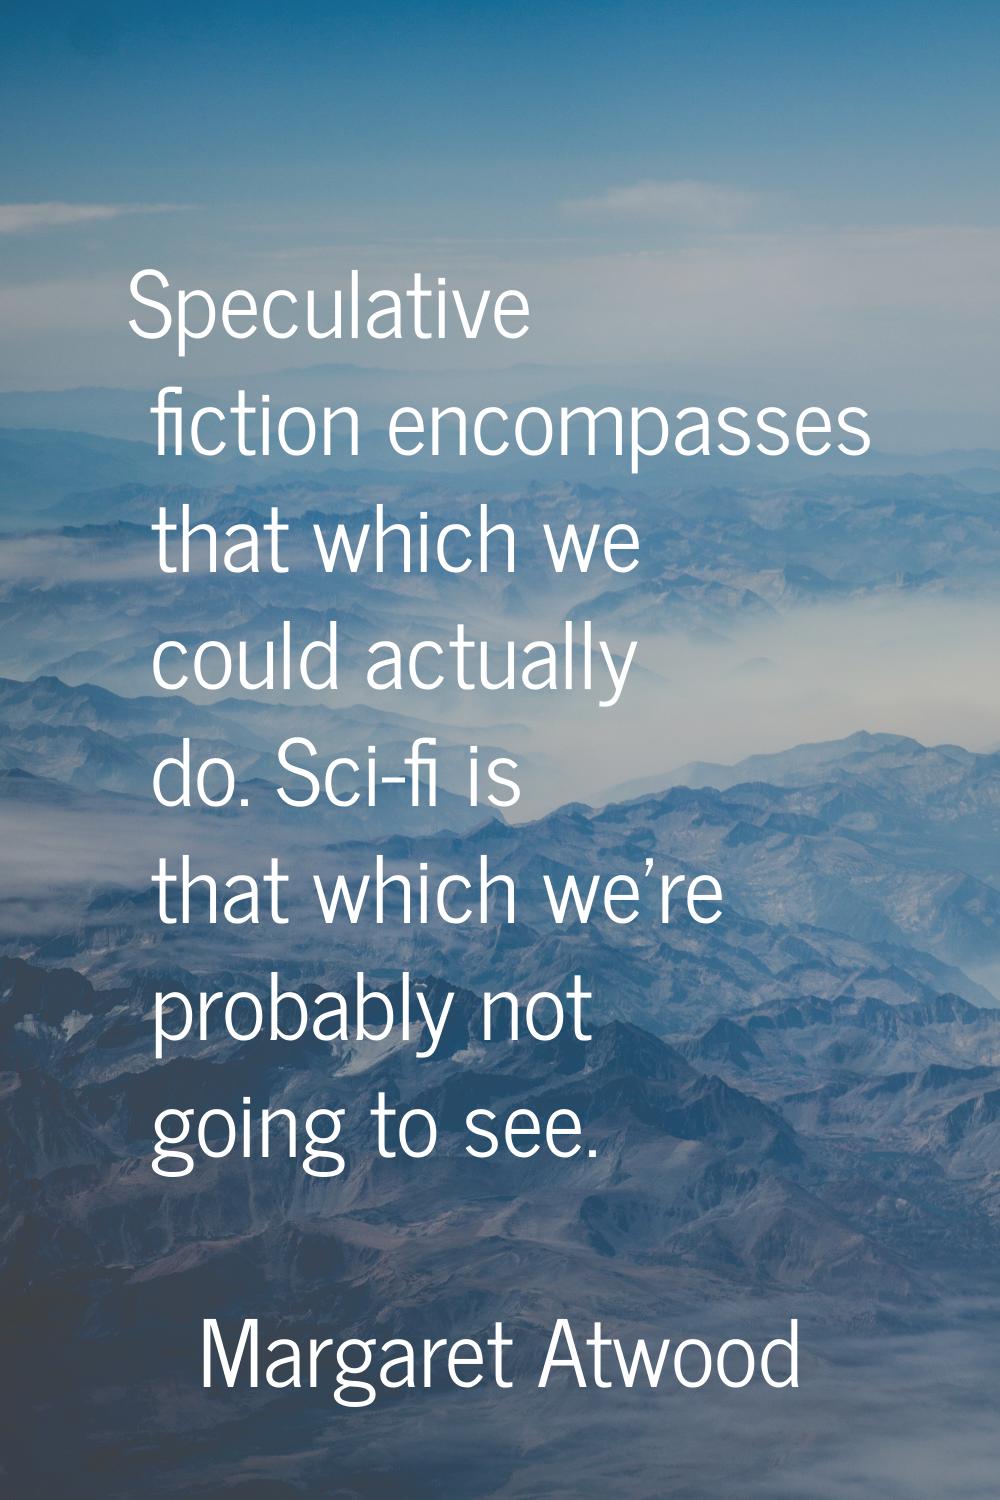 Speculative fiction encompasses that which we could actually do. Sci-fi is that which we're probabl